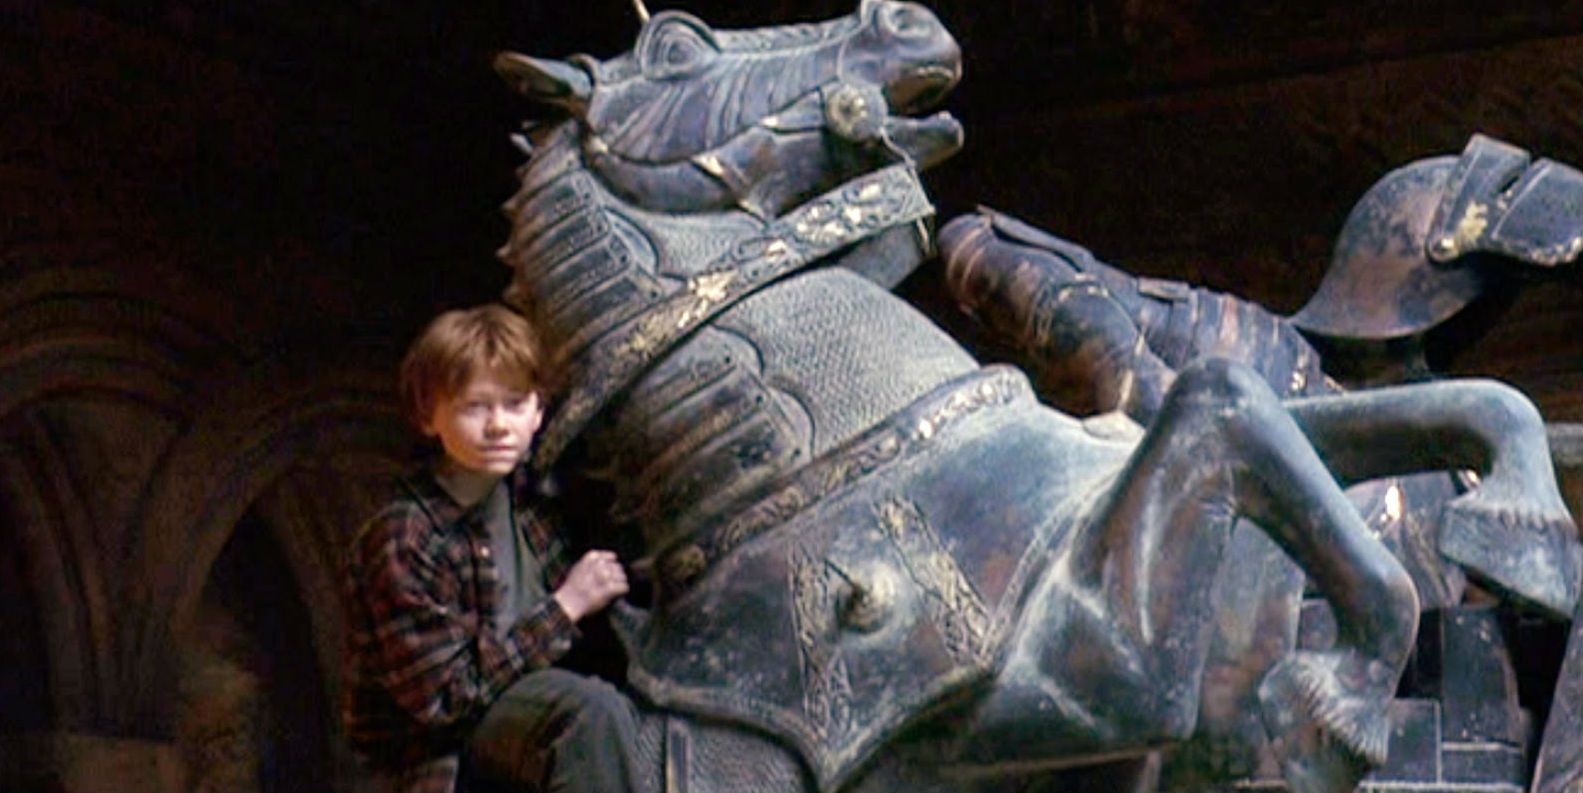 Harry Potter 10 Ways Ron Weasley Was Sold Short In The Movies